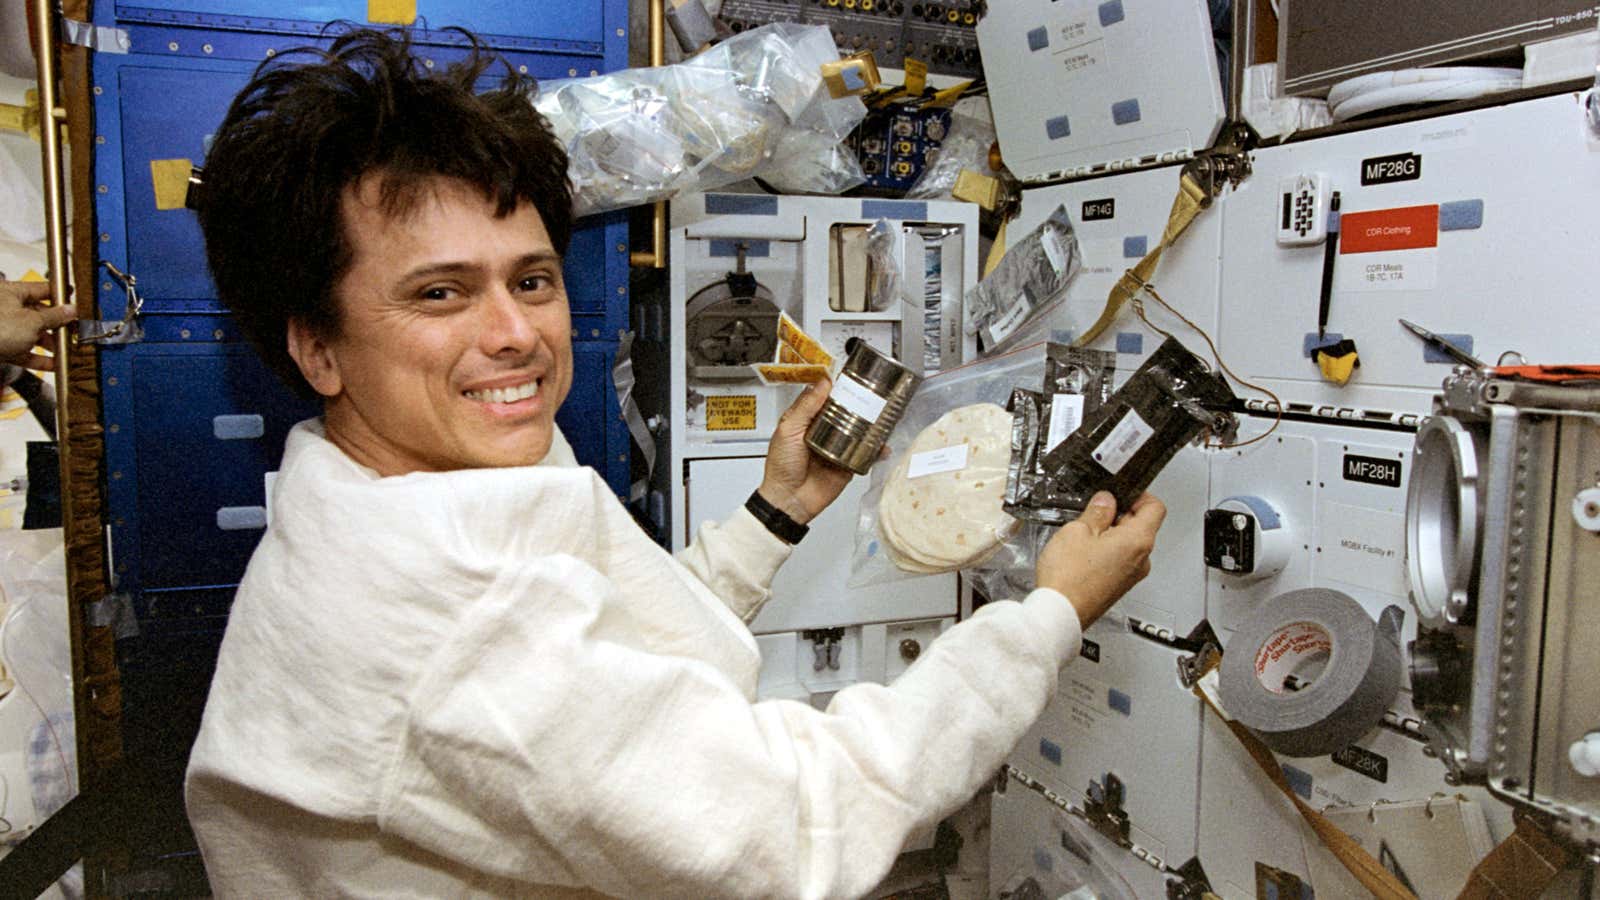 Costa Rican-American astronaut Franklin Chang Diaz prepares a meal during a 1996 space shuttle mission.